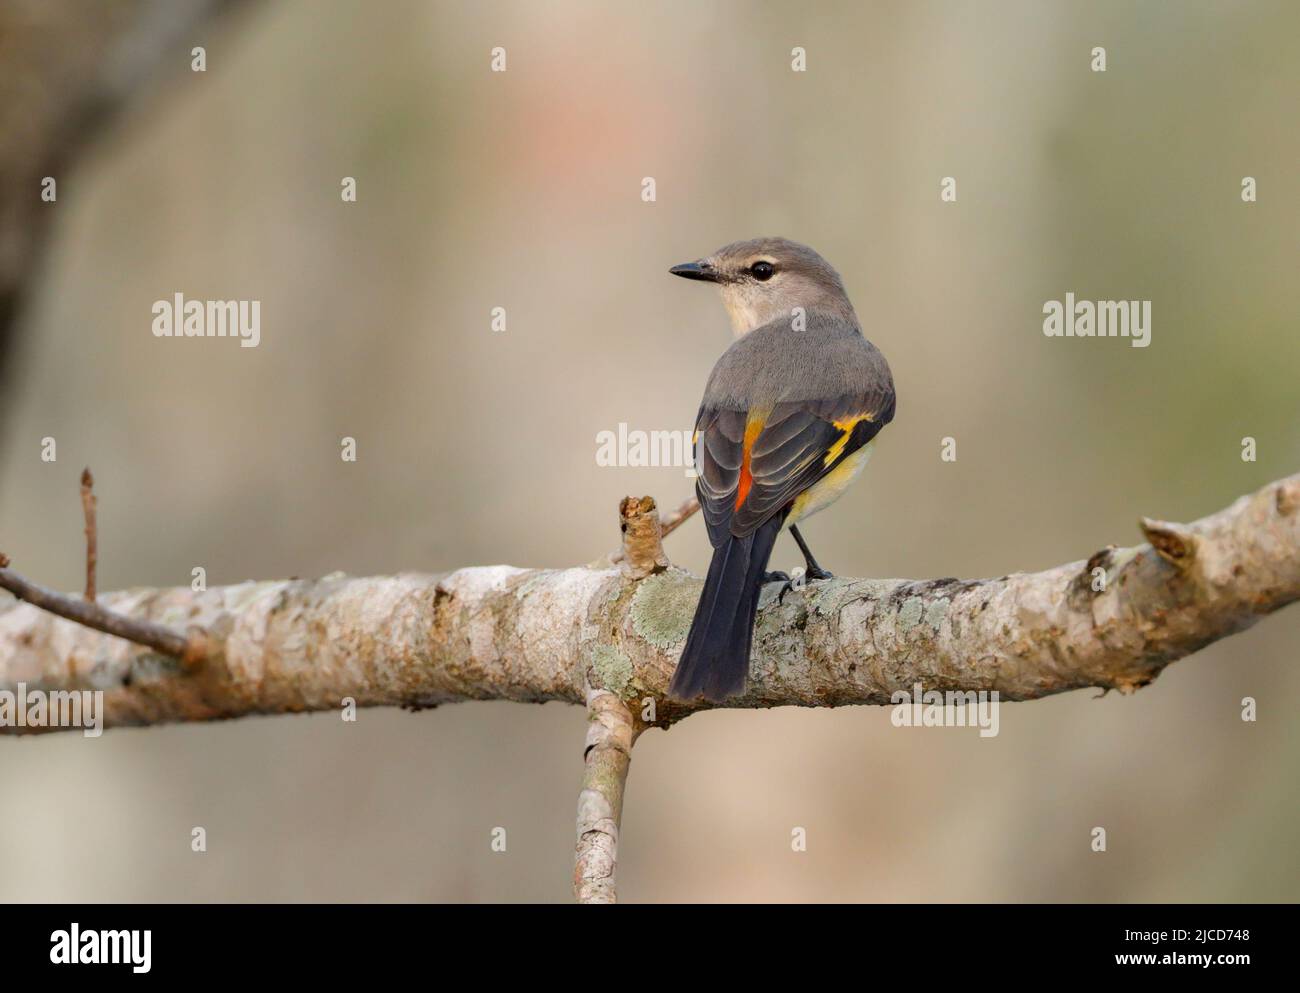 small minivet is a small passerine bird. This minivet is found in tropical southern Asia from the Indian subcontinent east to Indonesia. Stock Photo